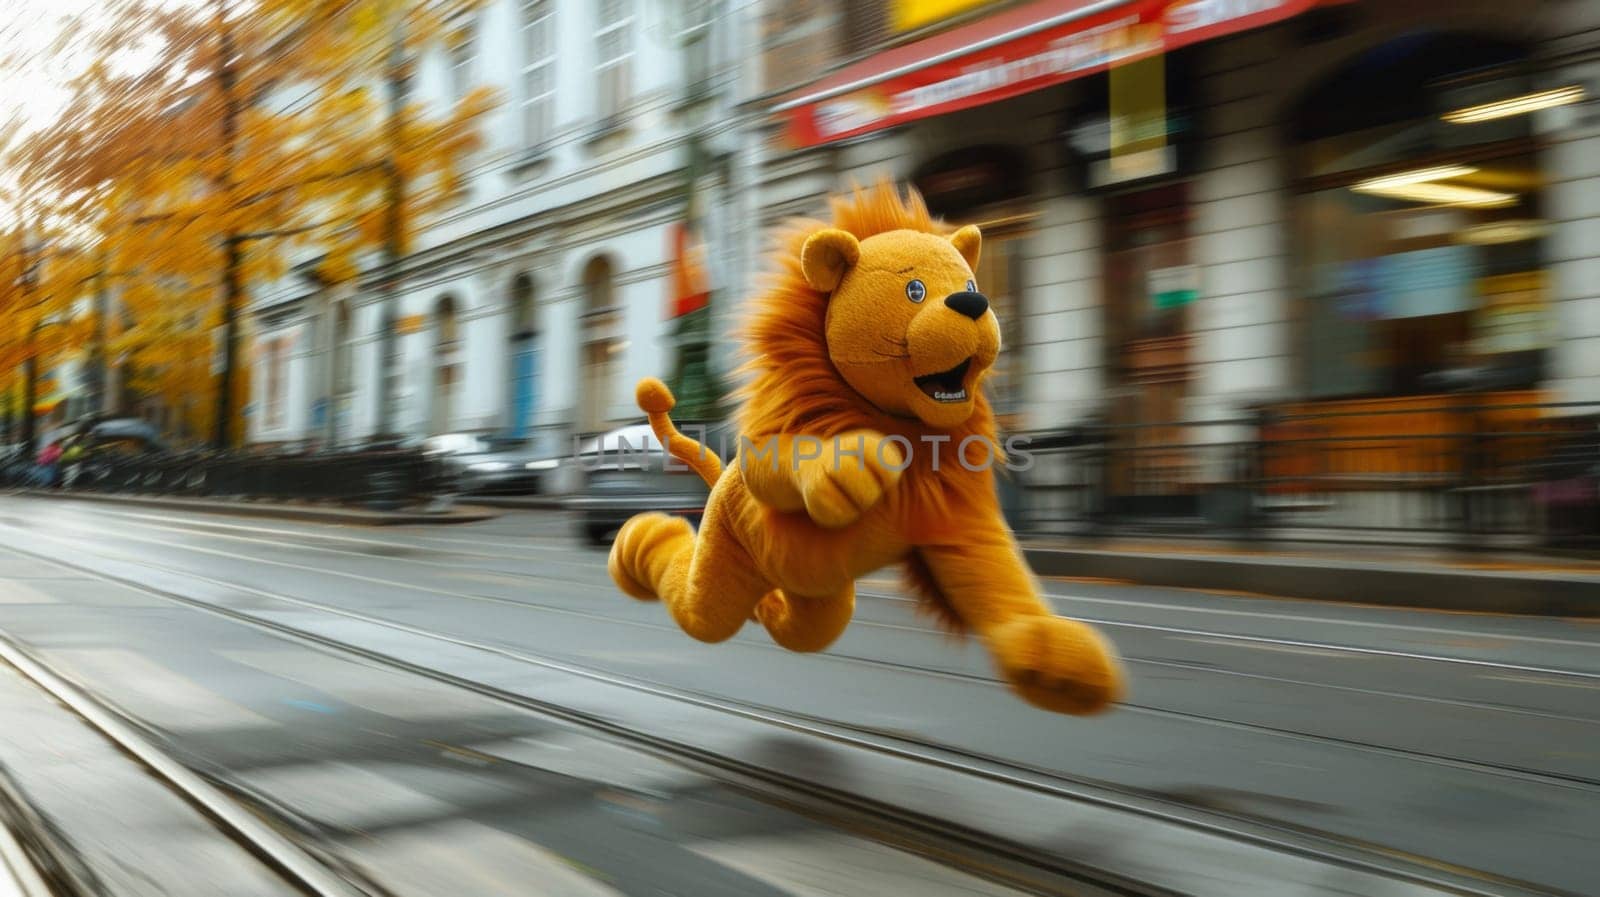 A stuffed lion running down a street on the side of buildings